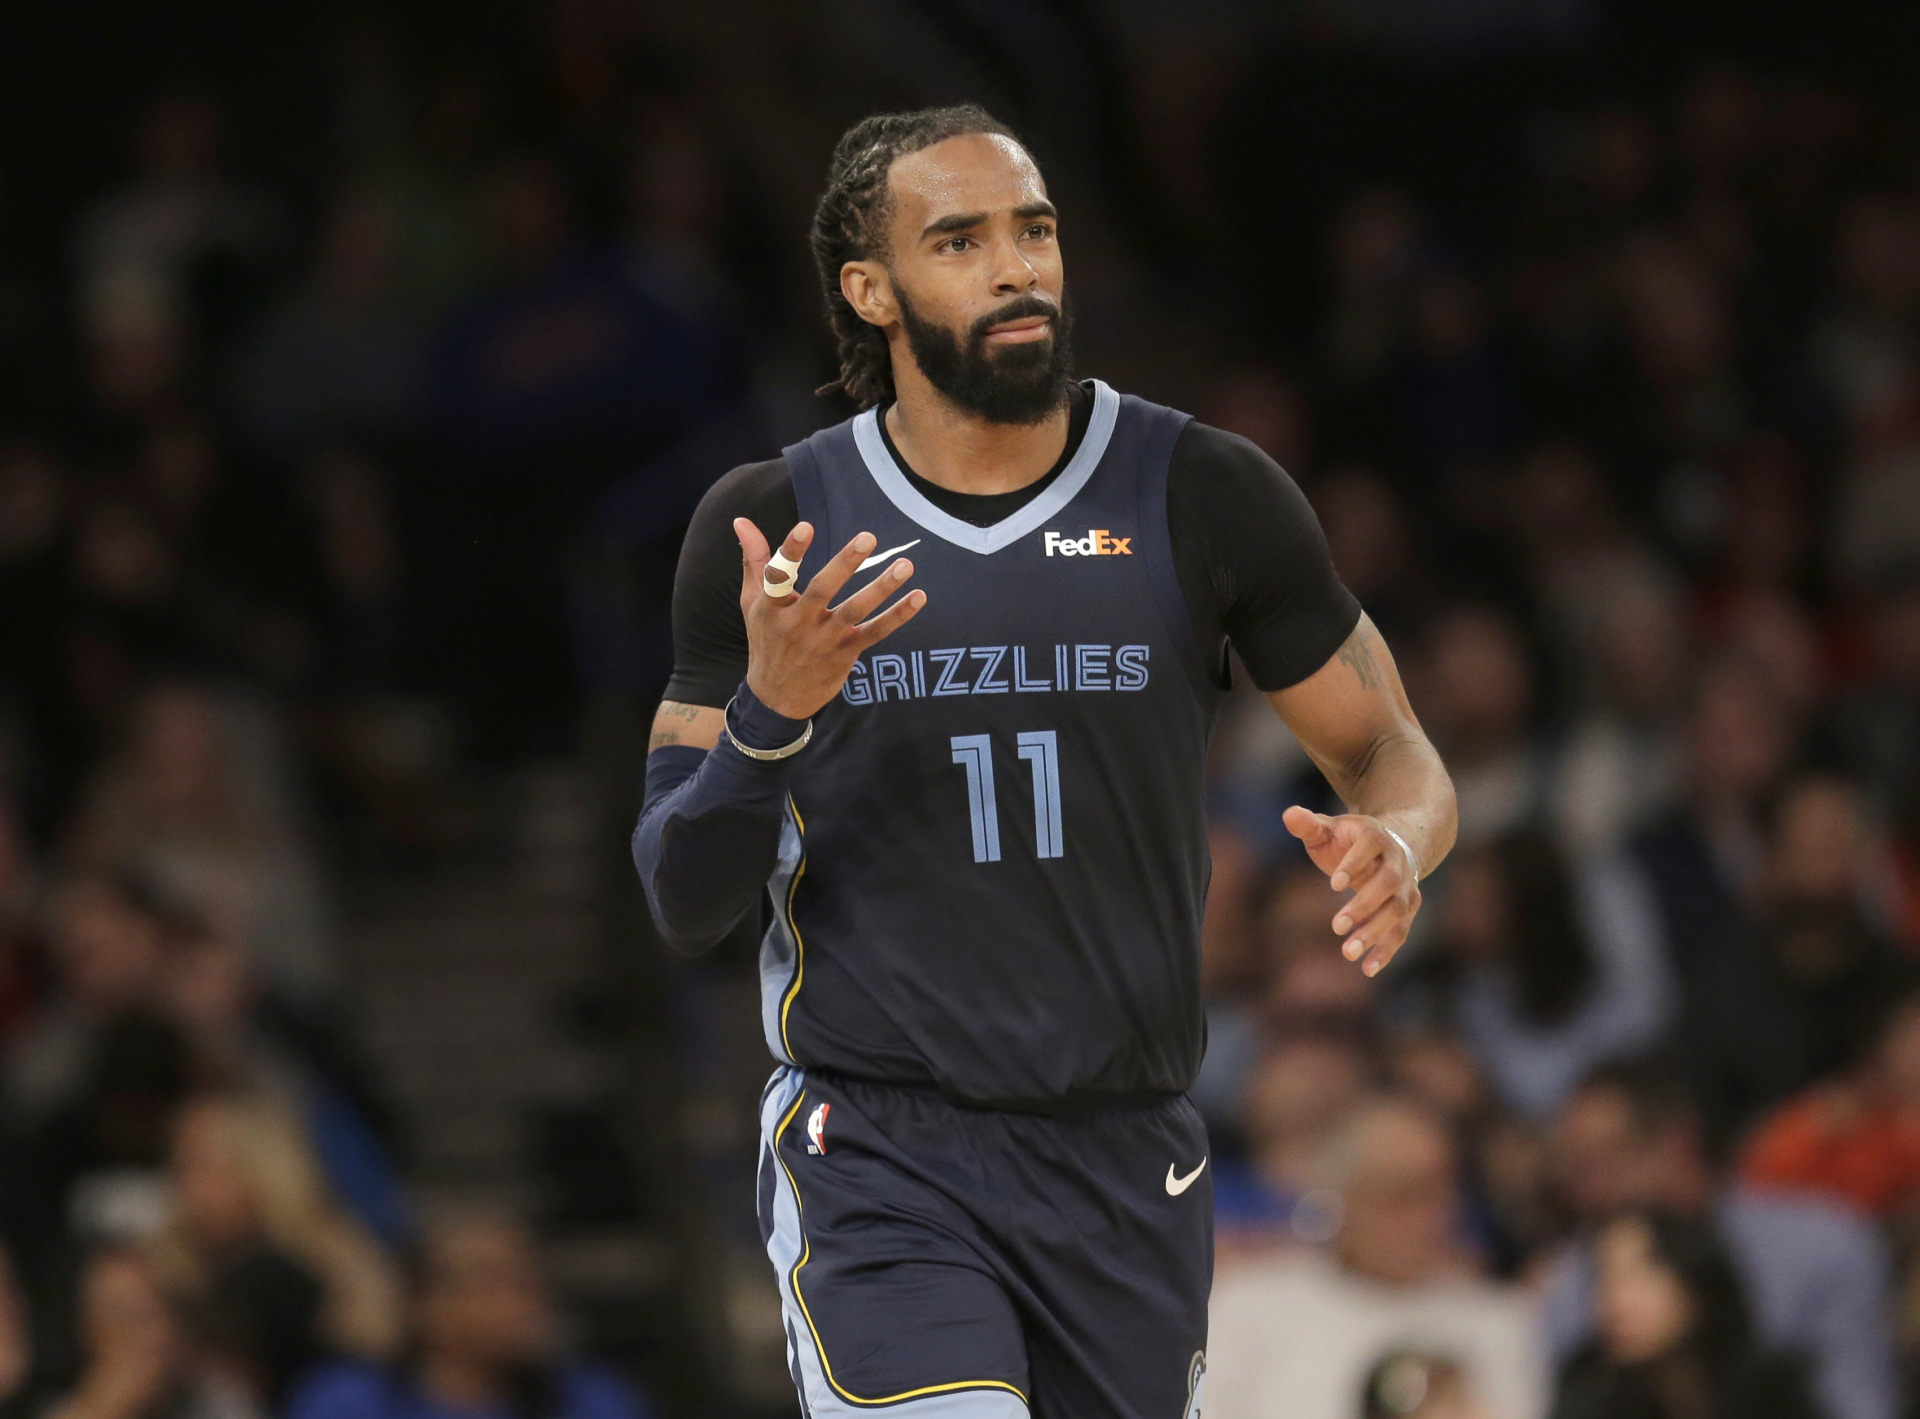 <span><strong>Memphis Grizzlies' Mike Conley gestures during the second half of the NBA basketball game against the New York Knicks, Sunday, Feb. 3, 2019, in New York. The Grizzlies defeated the Knicks 96-84.</strong>(AP Photo/Seth Wenig)</span>